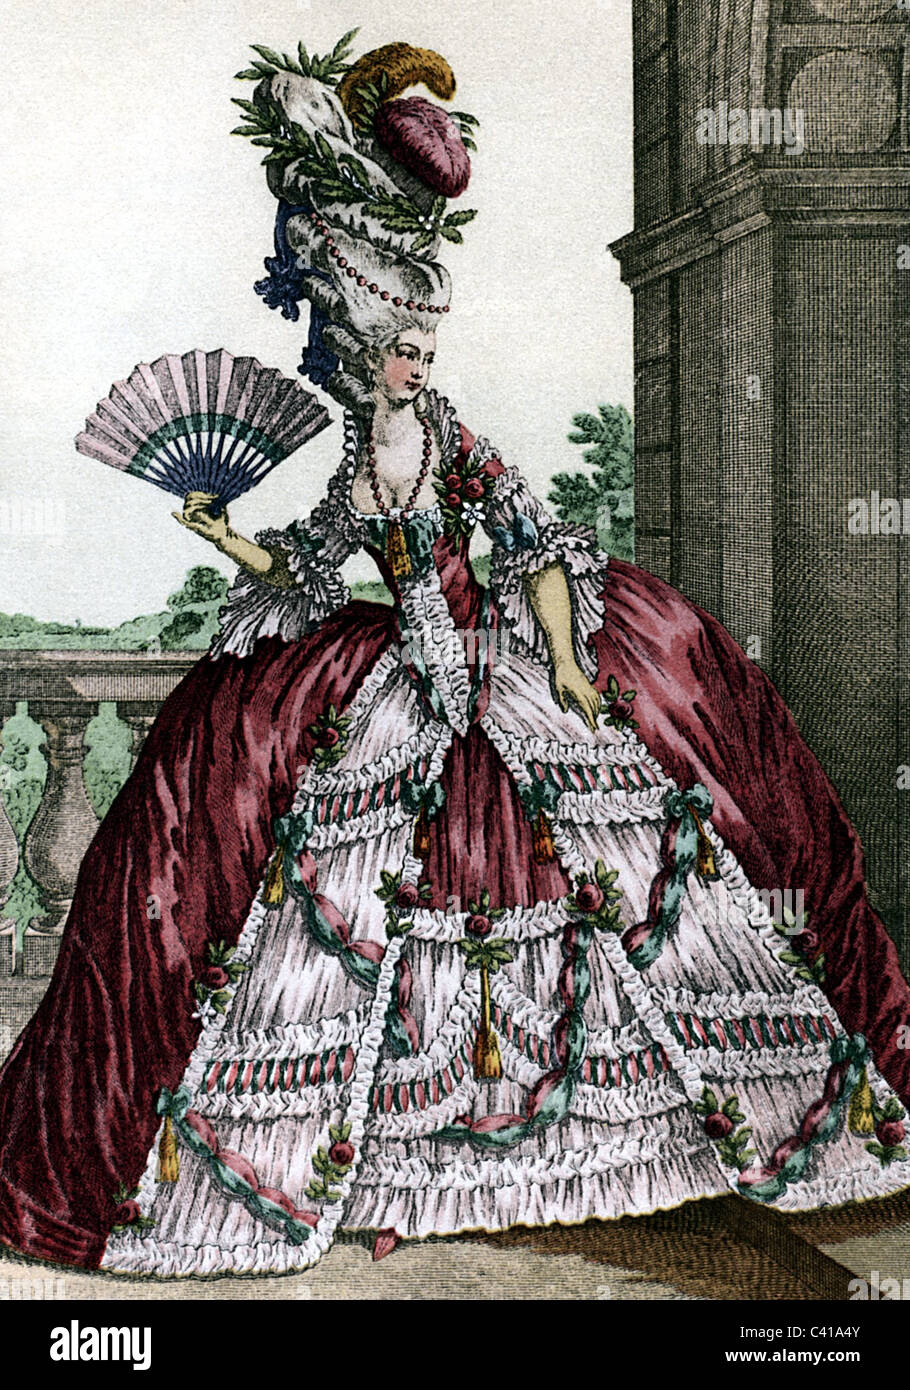 fashion, 18th century, engraving by Descrais grave Voysant, 1780, Additional-Rights-Clearences-Not Available Stock Photo